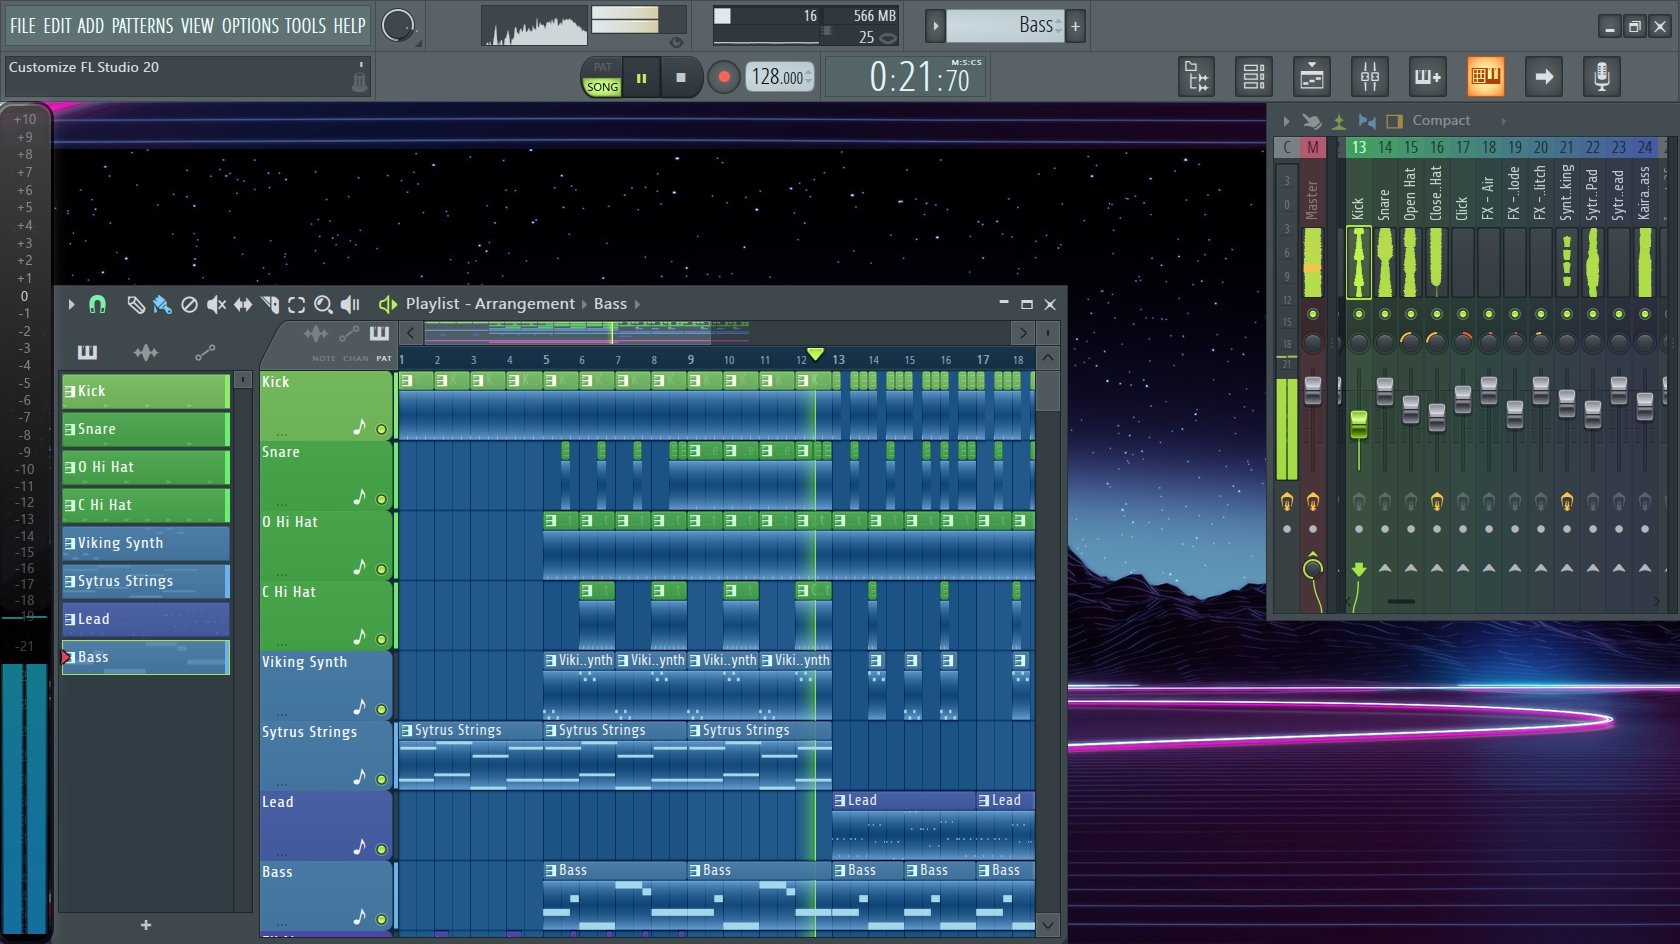 How To Change The Appearance of FL Studio 20